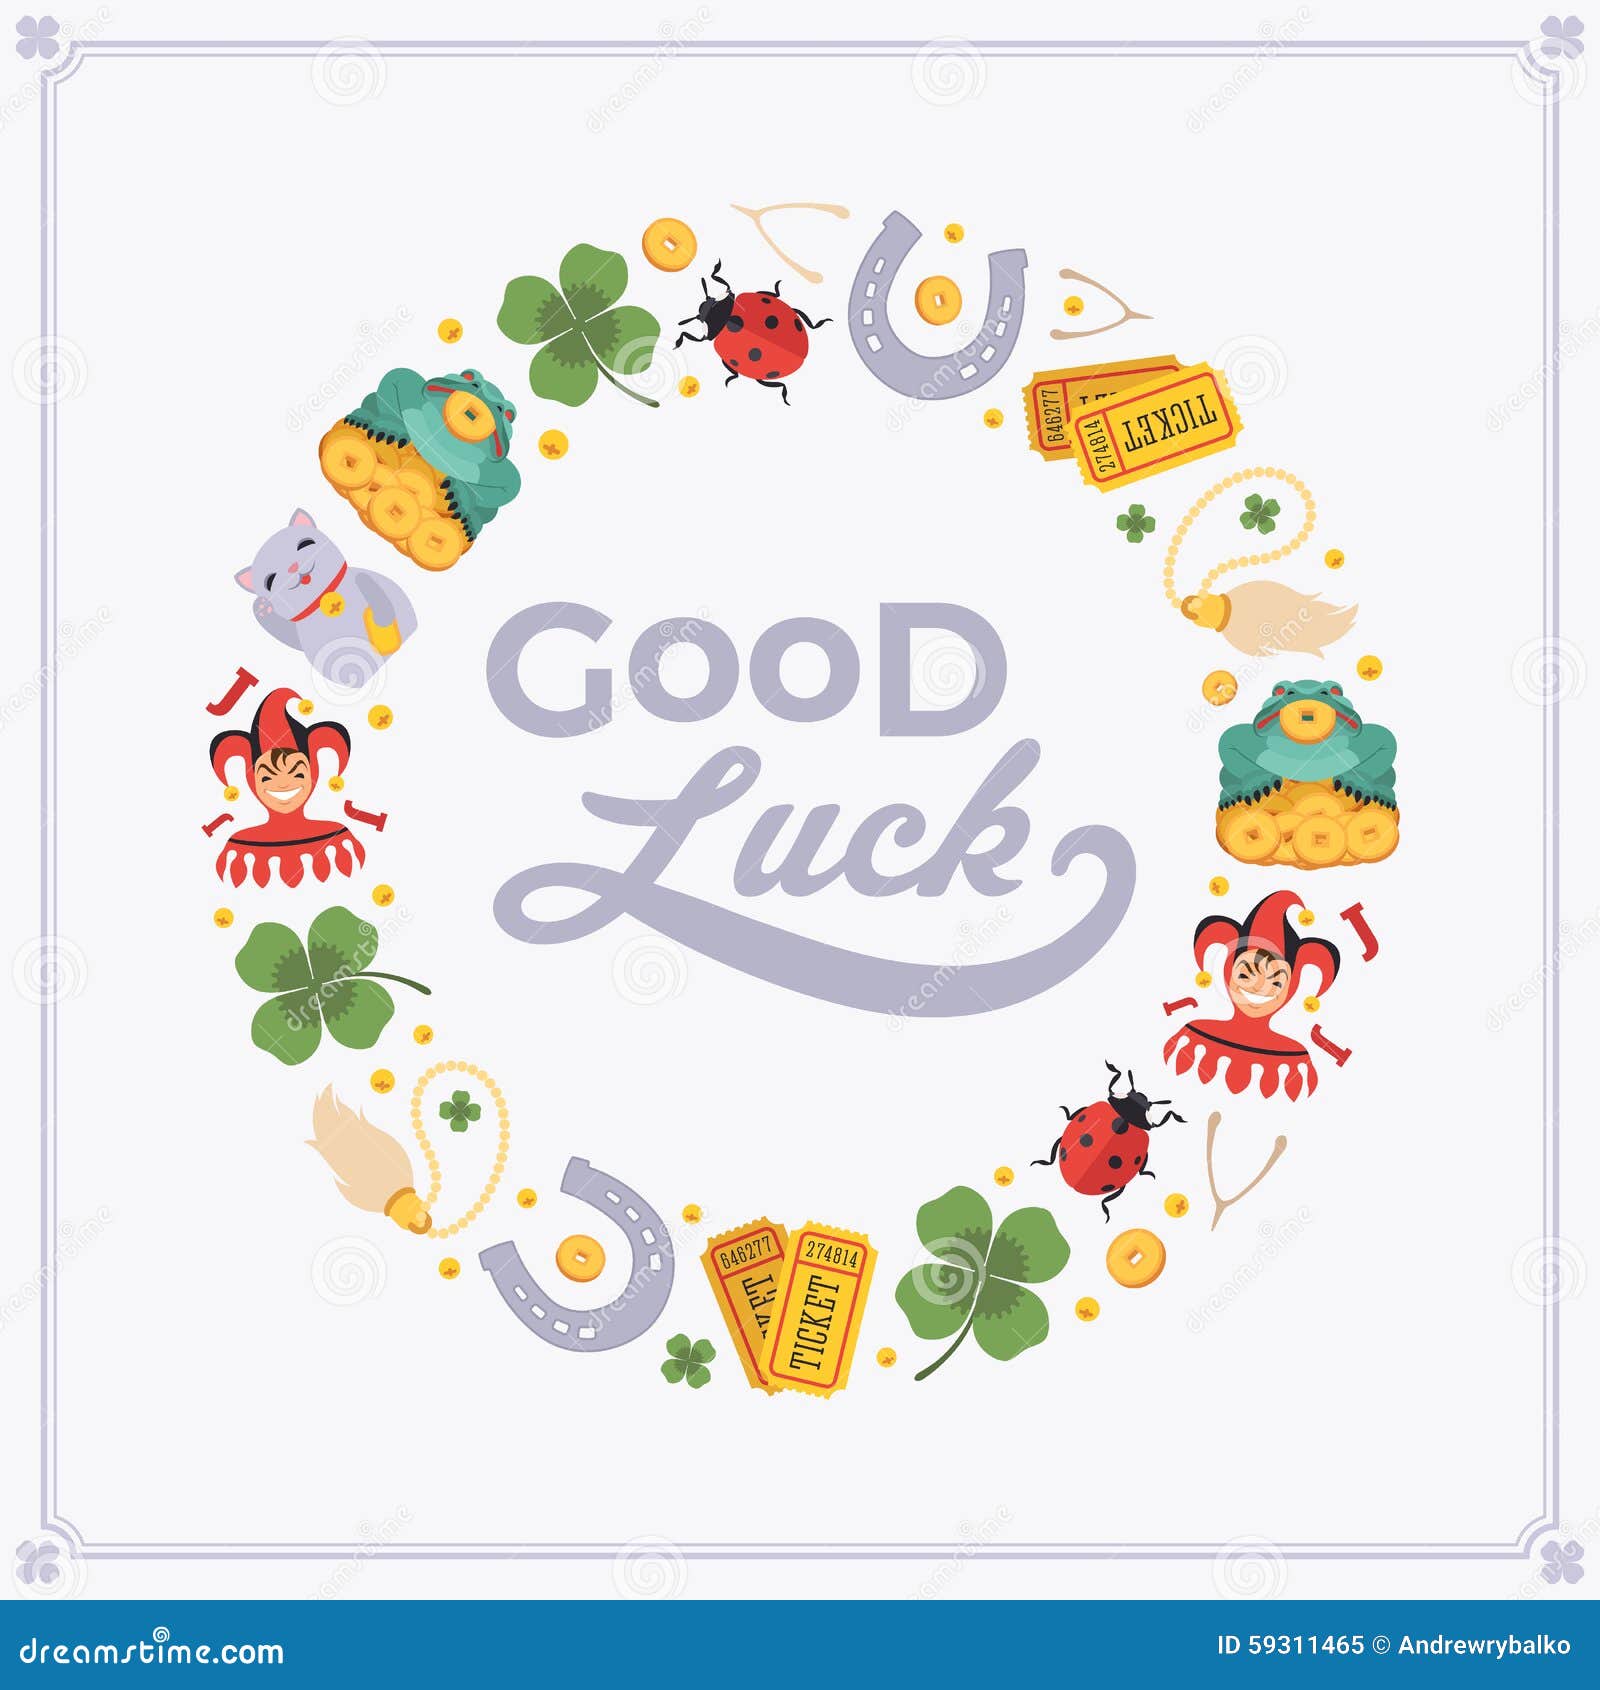 Vector Decorating Design Made of Lucky Charms, and Stock Vector With Good Luck Card Templates